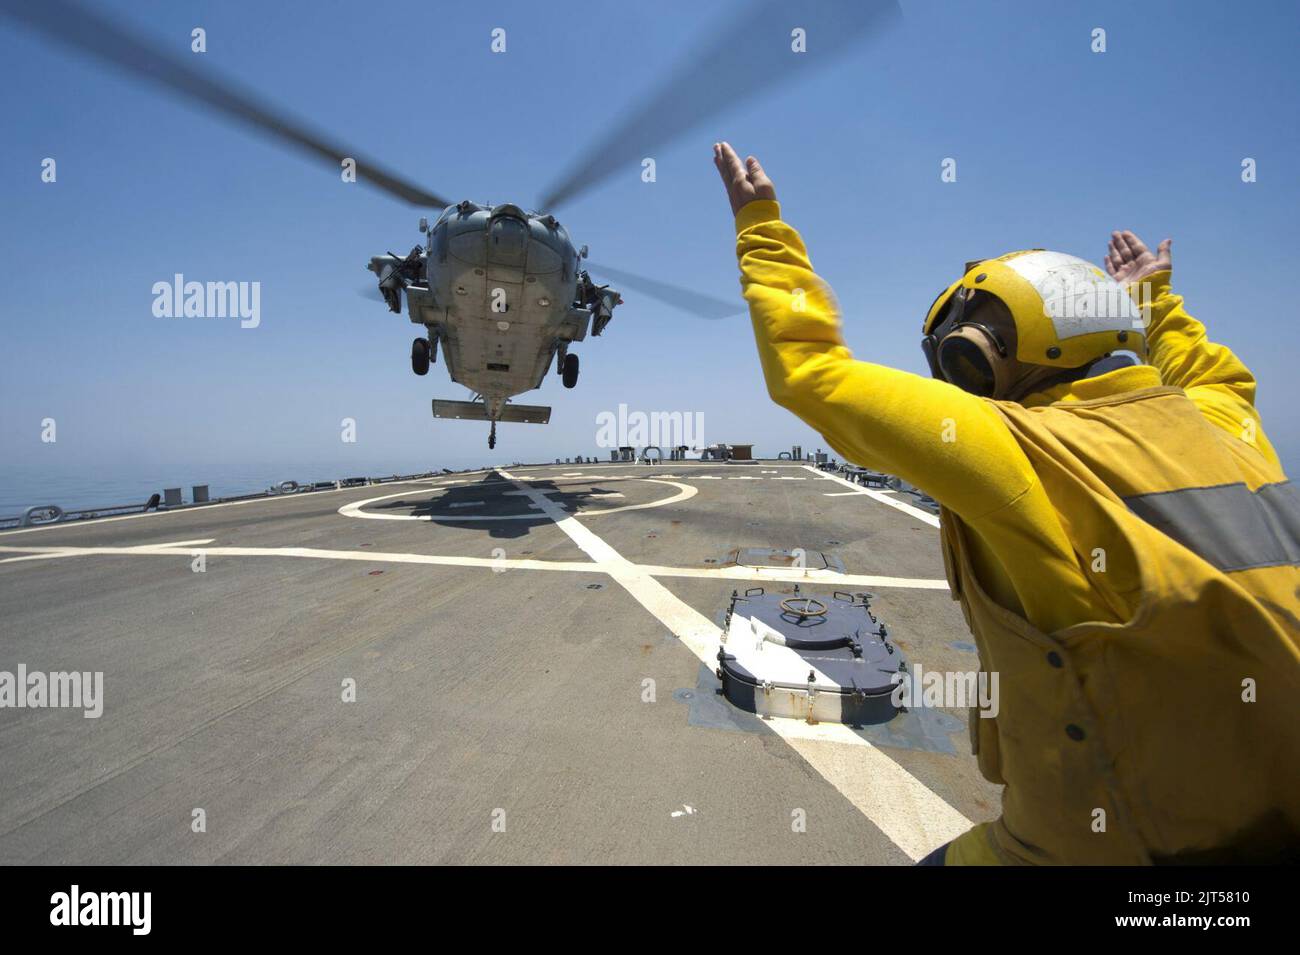 U.S. Navy Lt. j.g. guides an MH-60S Seahawk helicopter attached to Helicopter Sea Combat Squadron (HSC) 9 on the guided missile destroyer USS Arleigh Burke (DDG 51) in the Persian Gulf June 28 140628 Stock Photo